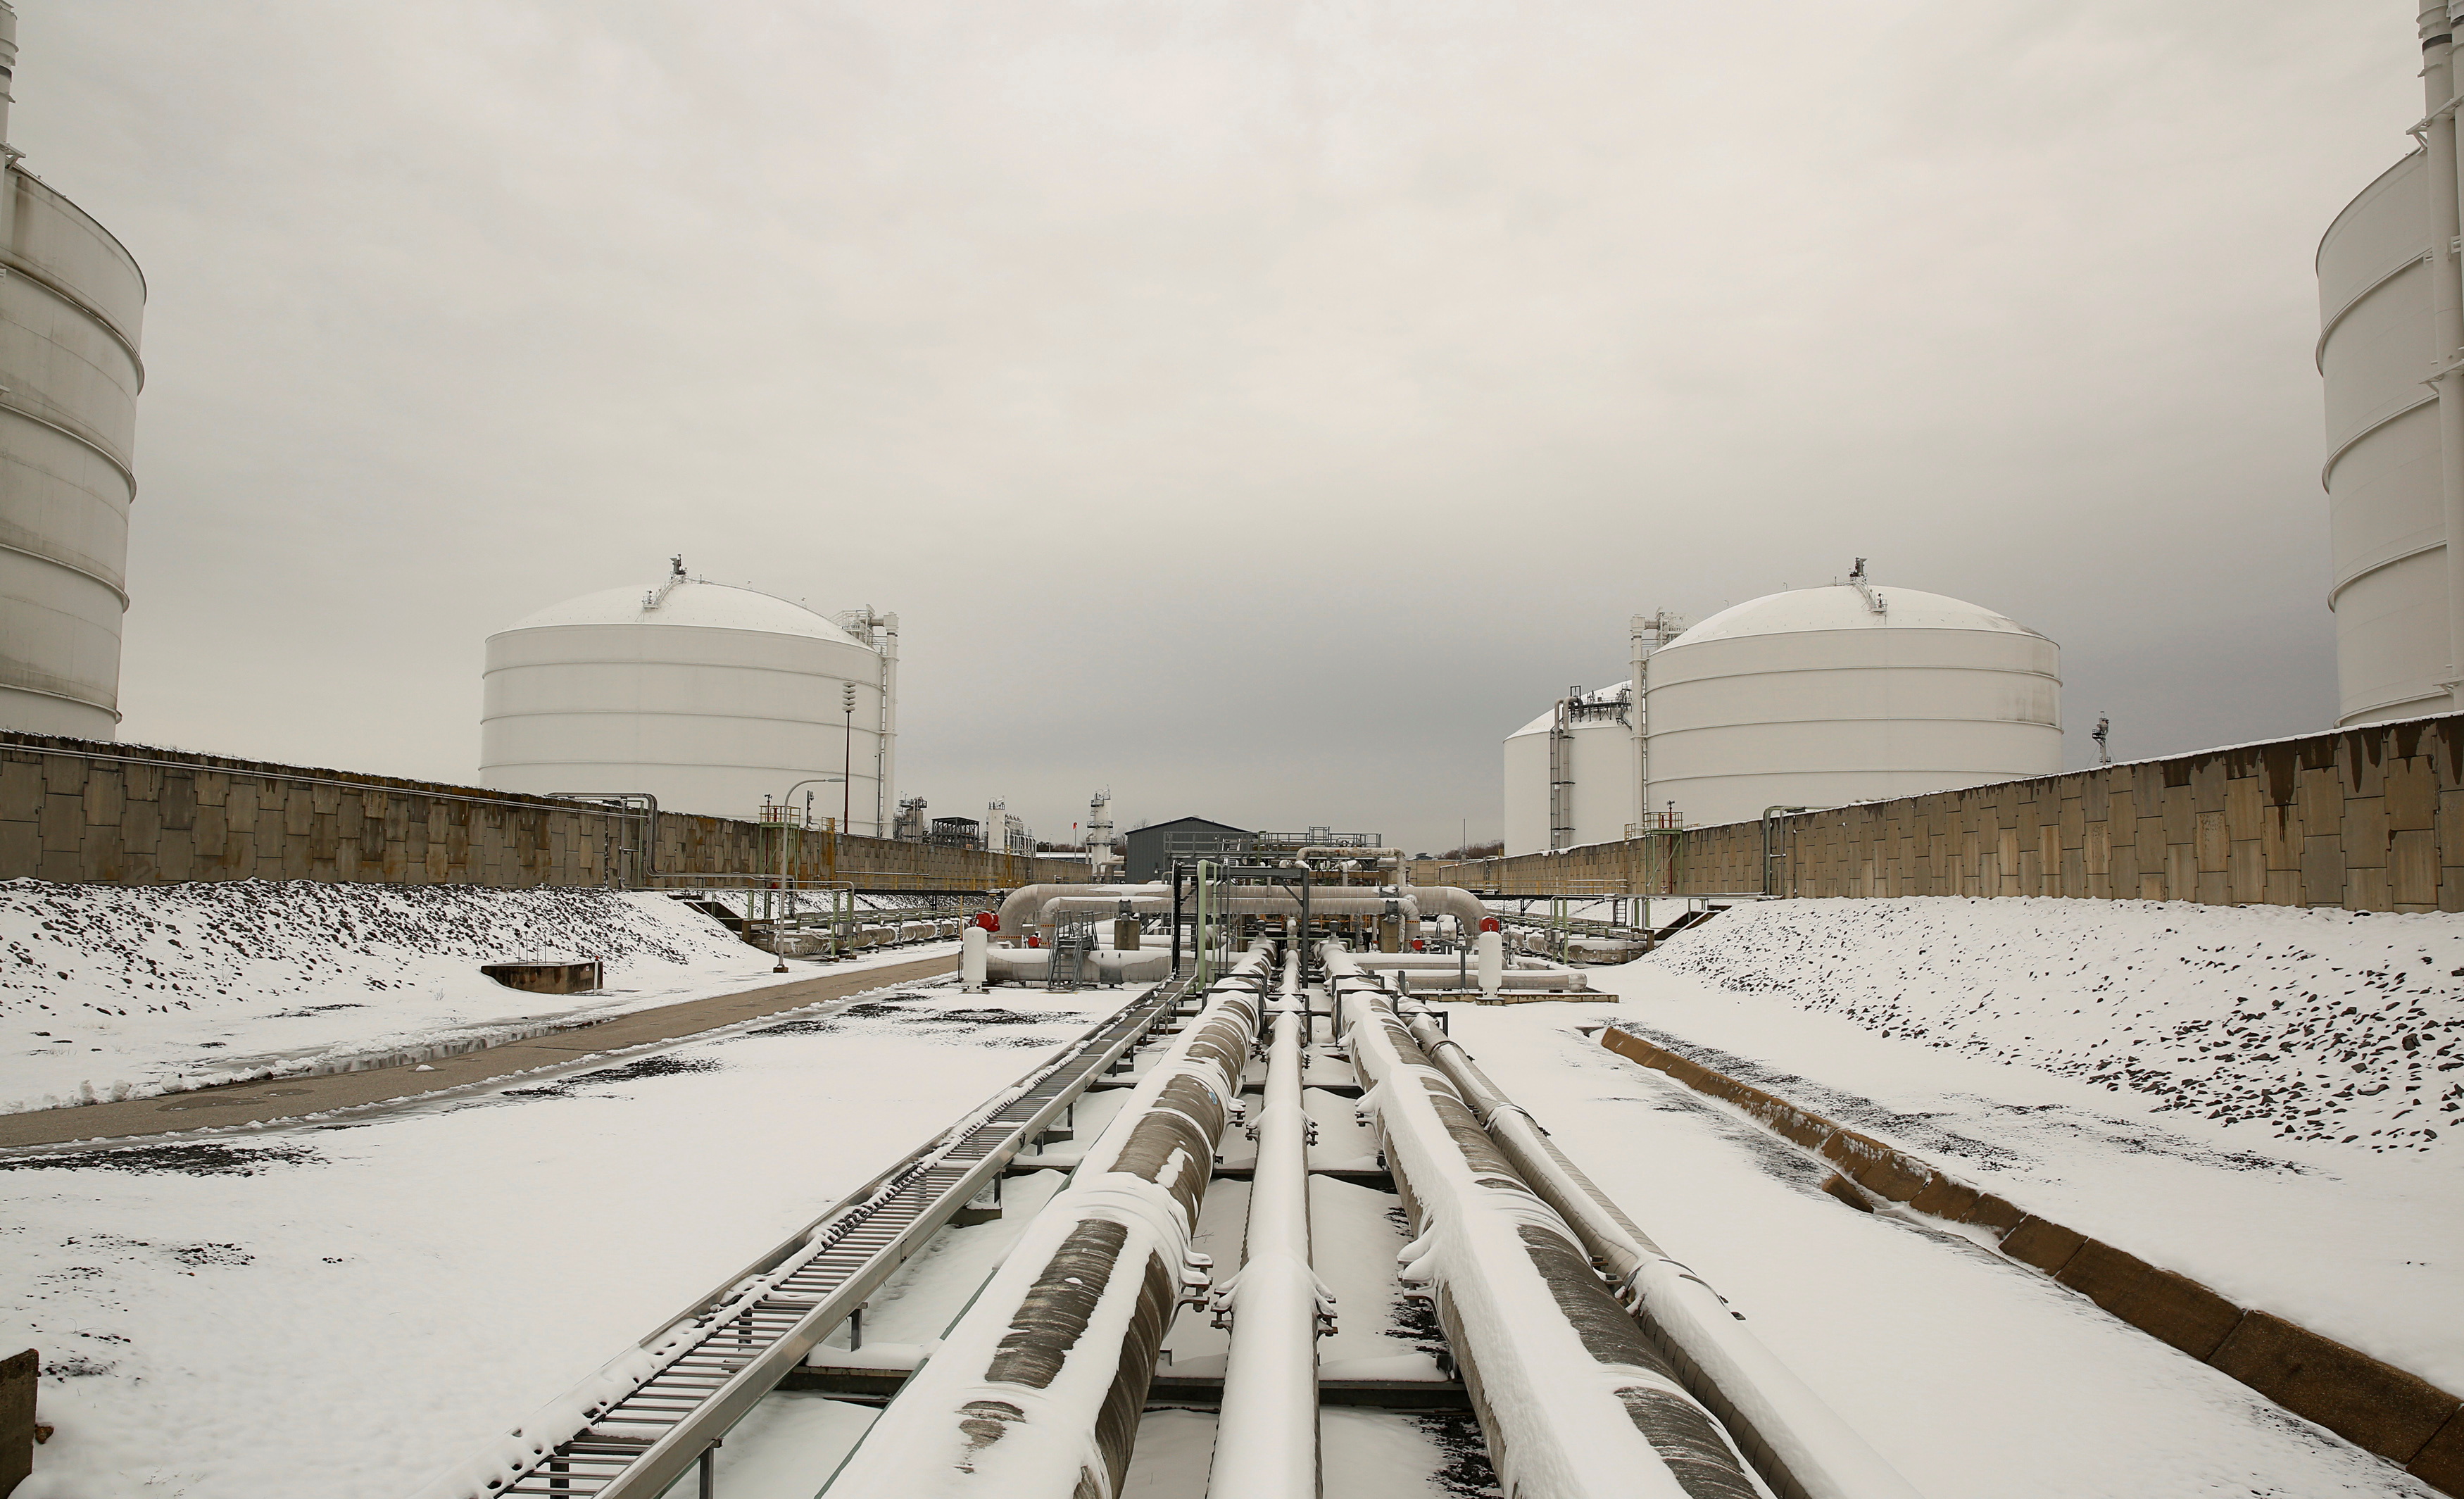 Snow covered transfer lines leading to storage tanks at the Dominion Cove Point Liquefied Natural Gas (LNG) terminal in Lusby, Maryland